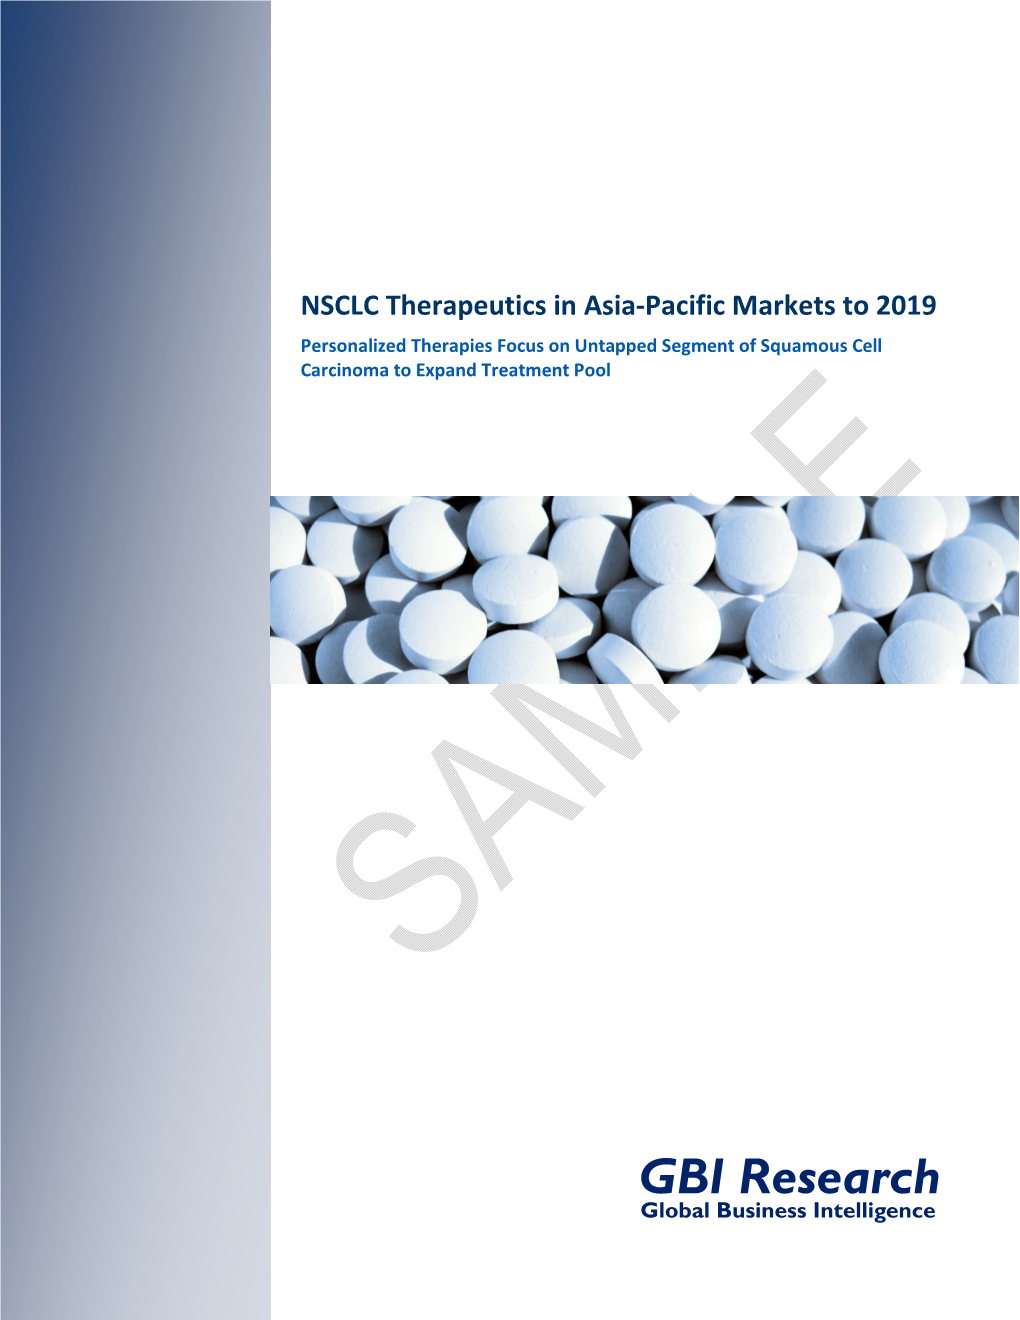 NSCLC Therapeutics in Asia-Pacific Markets to 2019 Personalized Therapies Focus on Untapped Segment of Squamous Cell Carcinoma to Expand Treatment Pool